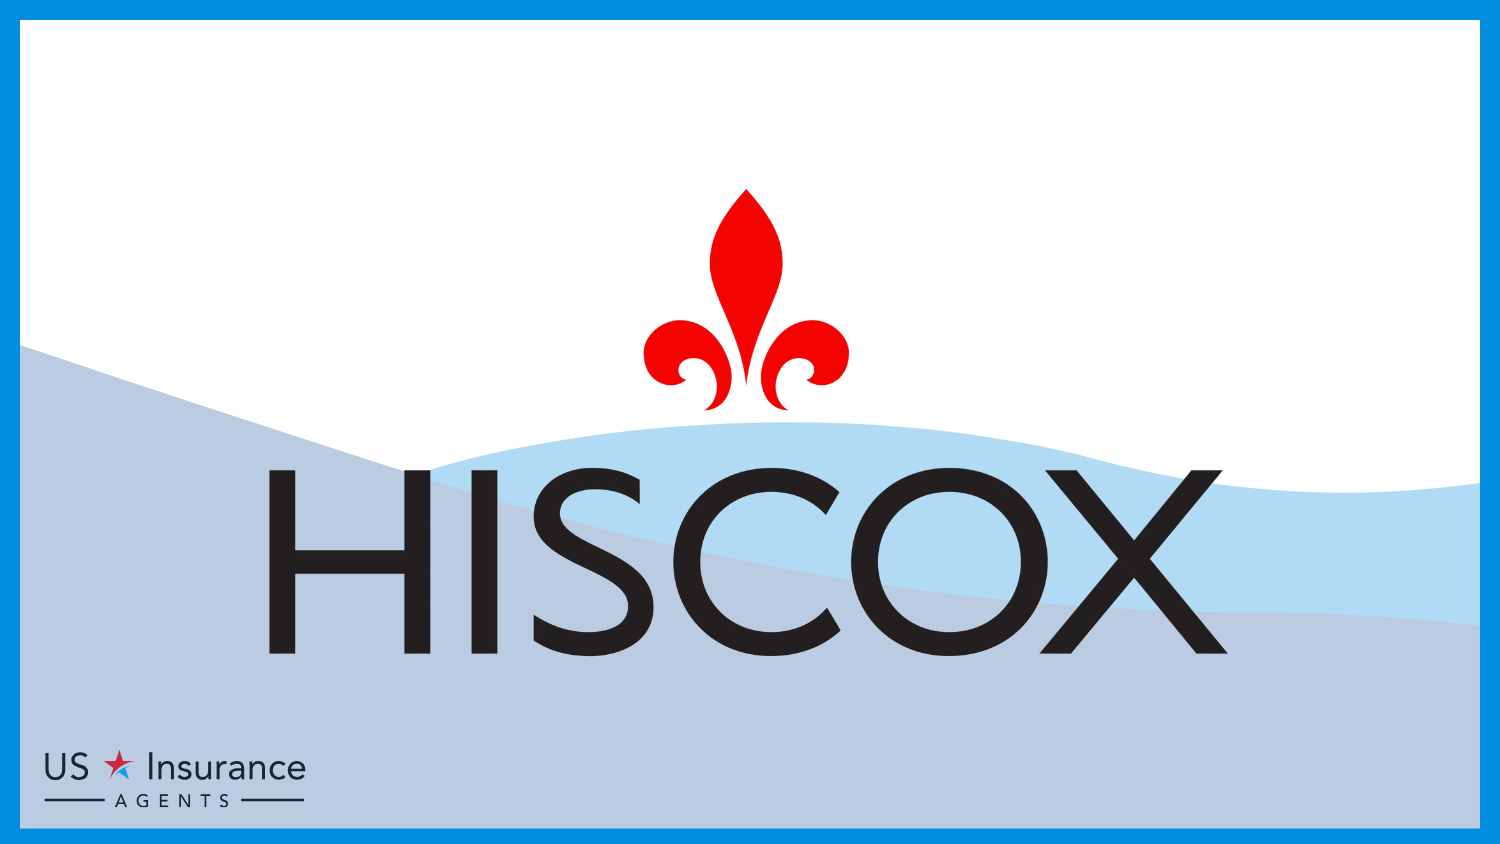 Hiscox: Best Business Insurance for Live Event Performers